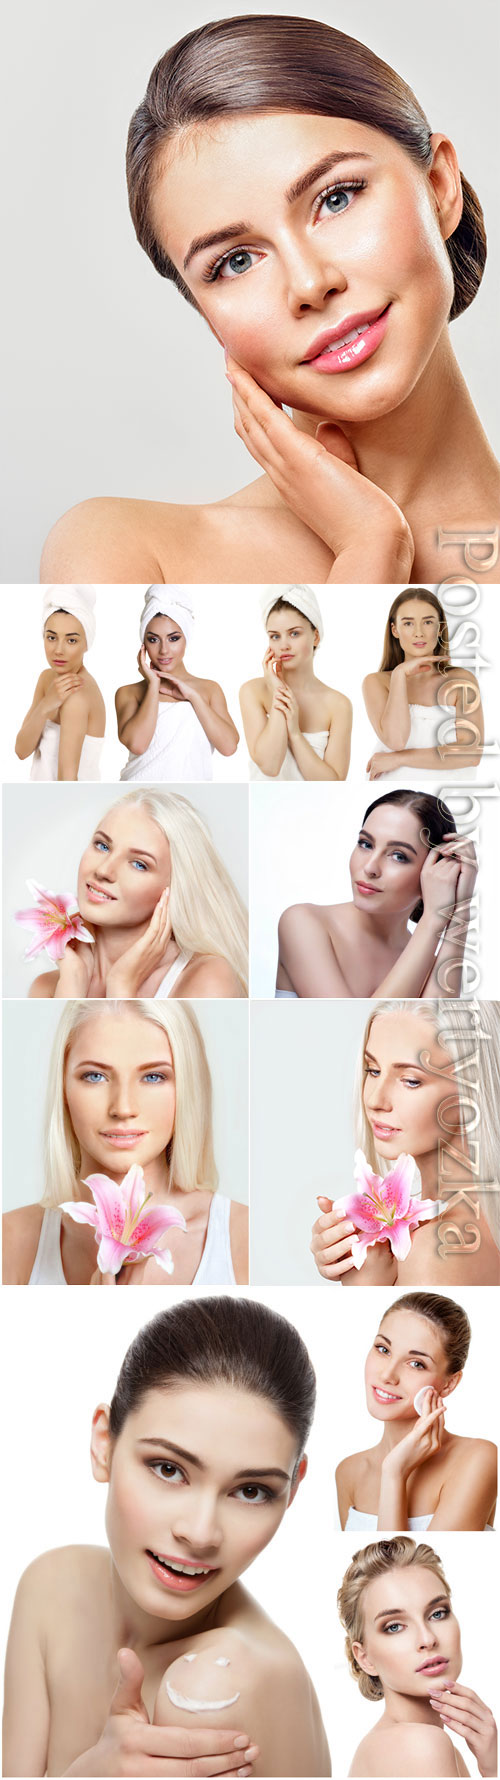 Healthy well-groomed skin of women face stock photo